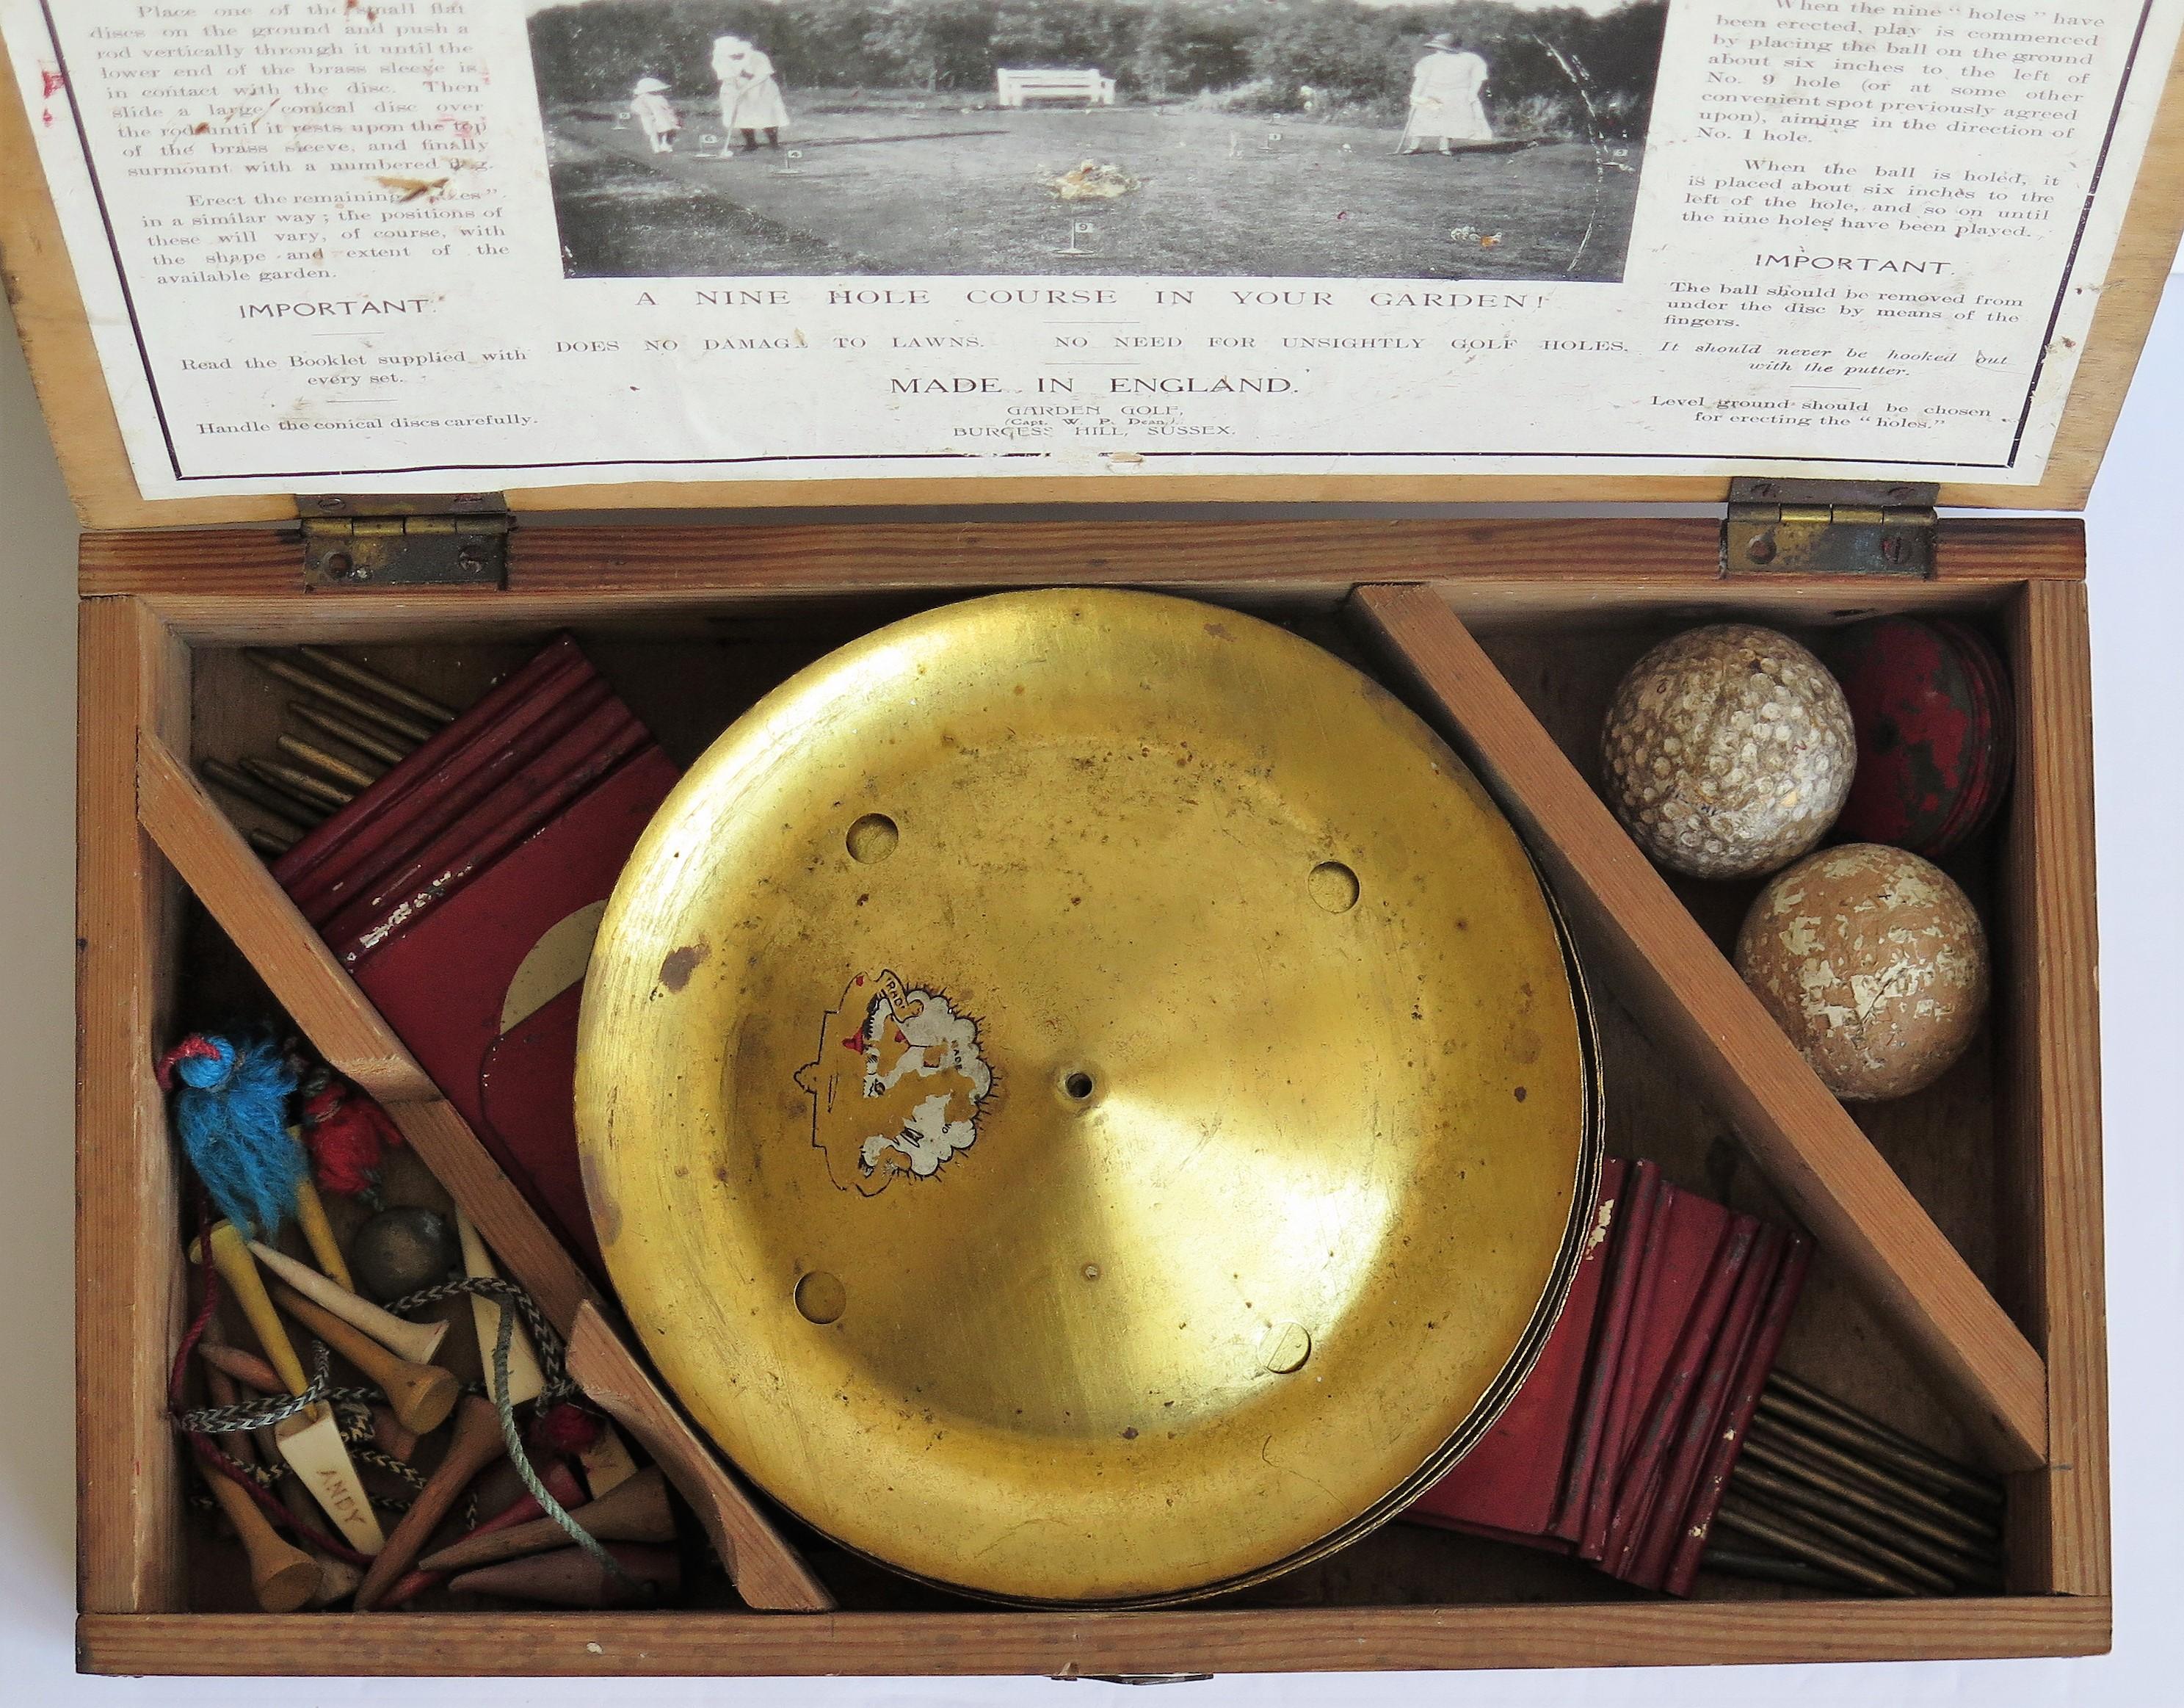 This is an original Garden Golf Game, coming with its own wooden storage box, all dating to the early 20th century, circa 1920.

This is a Classic game of strategy and skill, fun to play for all age groups and useful for any player to practice on